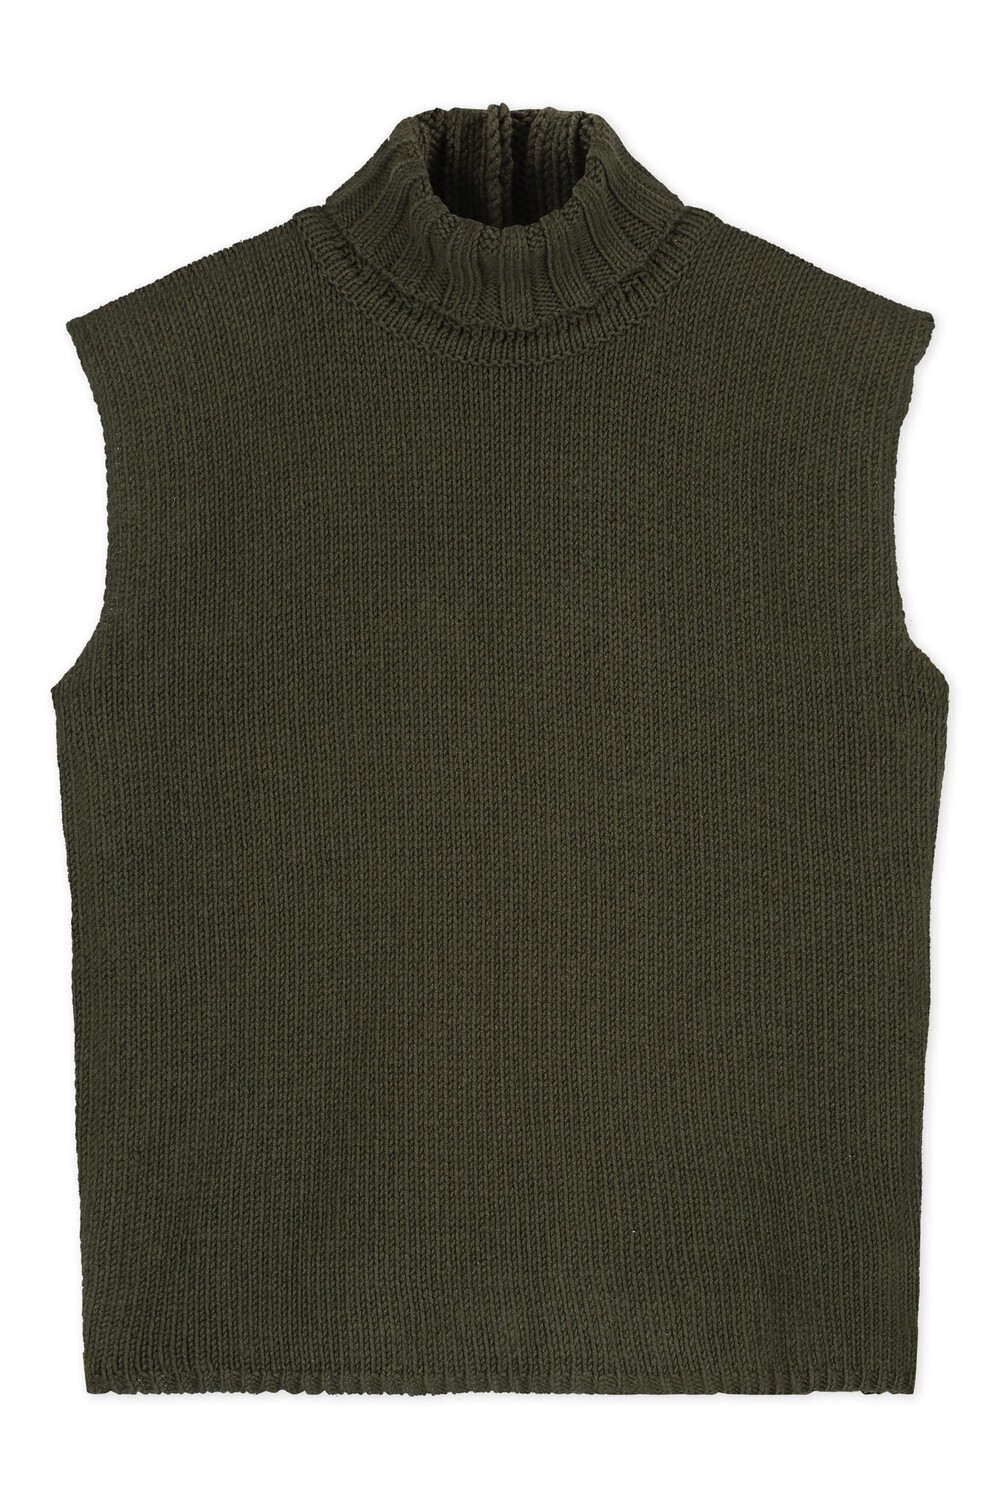 KNITTED SLEEVELESS TOP WITH TURTLENECK IN MILITARE